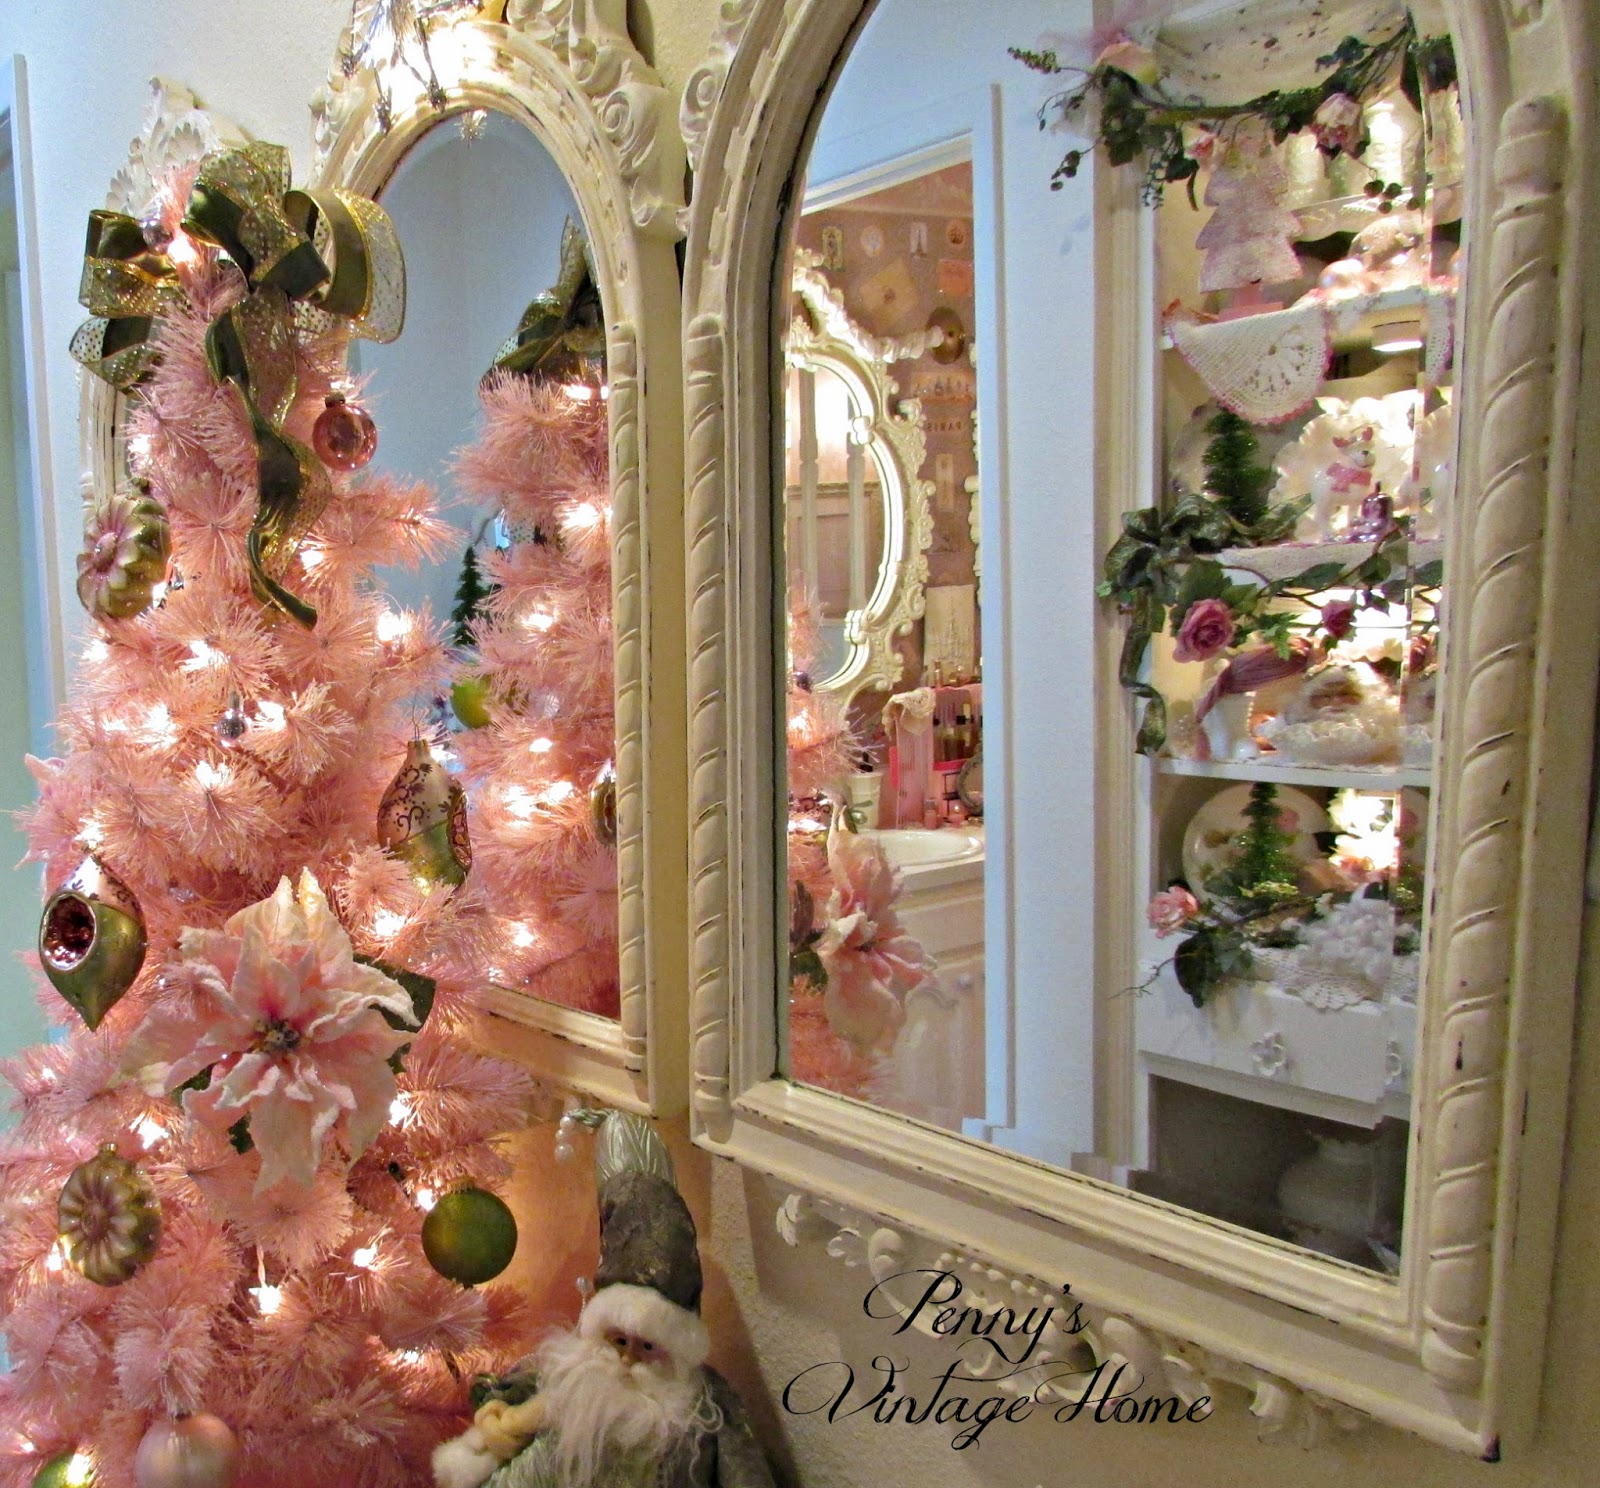 Penny's Vintage Home Adding Christmas to Existing Decor